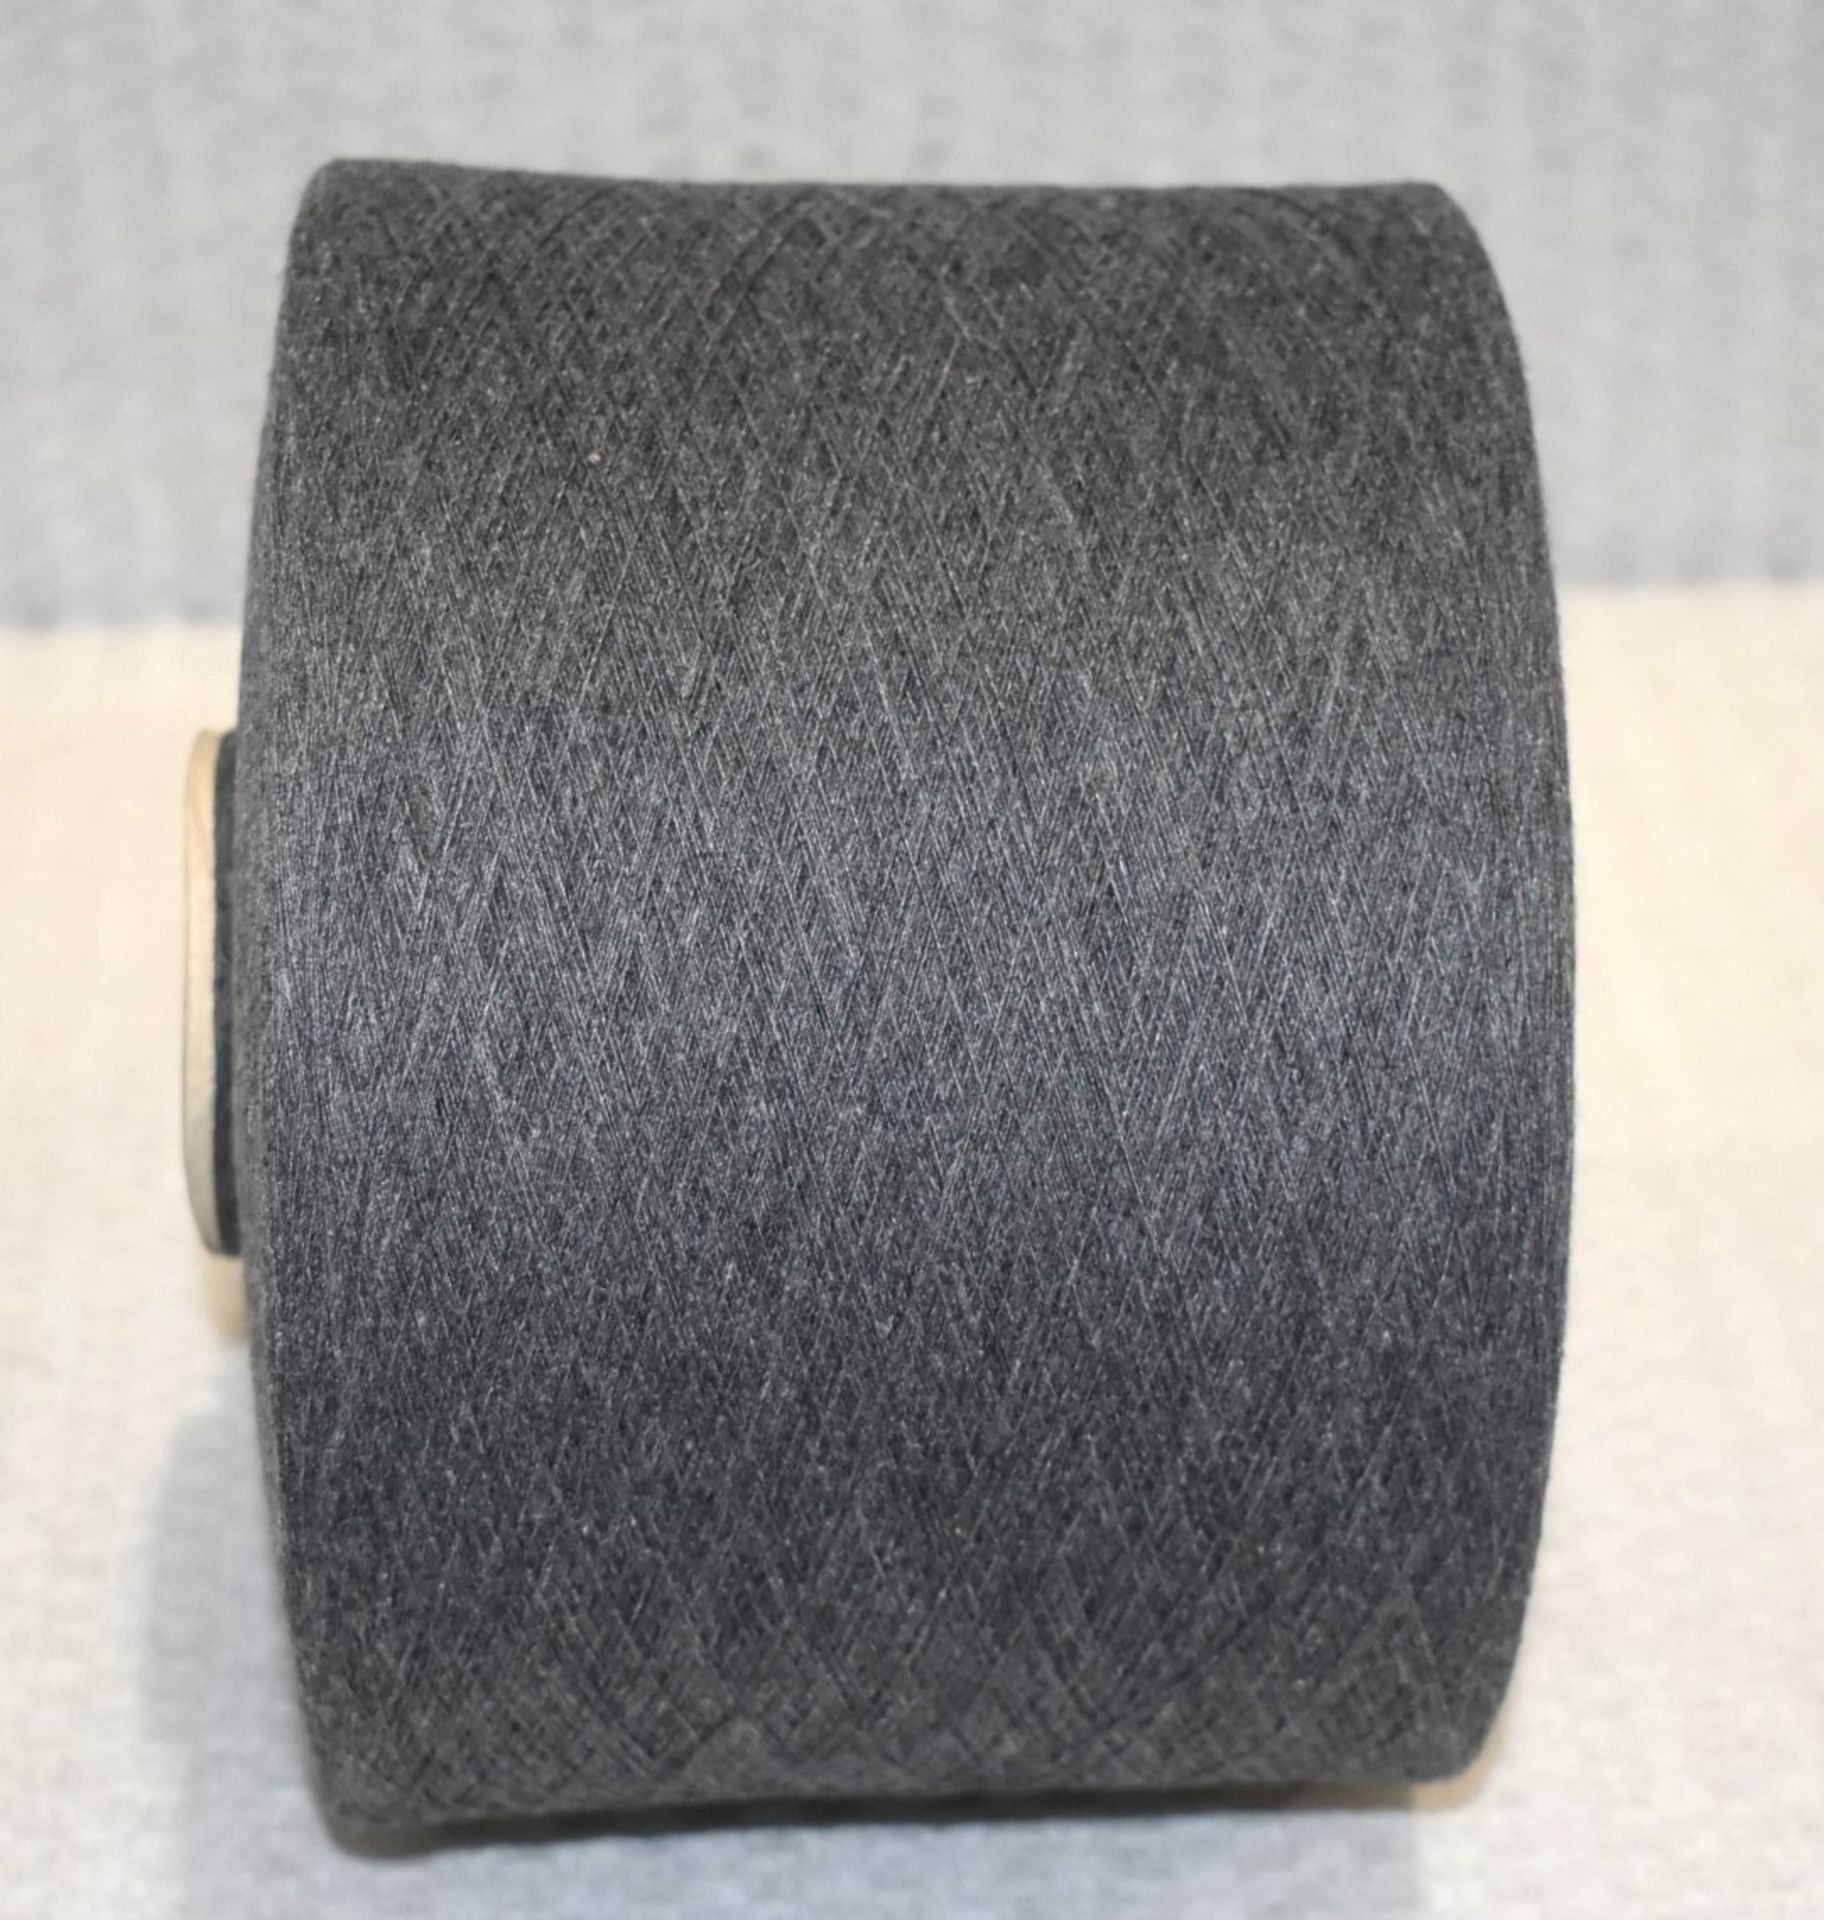 36 x Cones of 1/13 MicroCotton Knitting Yarn - Mid Grey - Approx Weight: 2,500g - New Stock ABL Yarn - Image 9 of 10